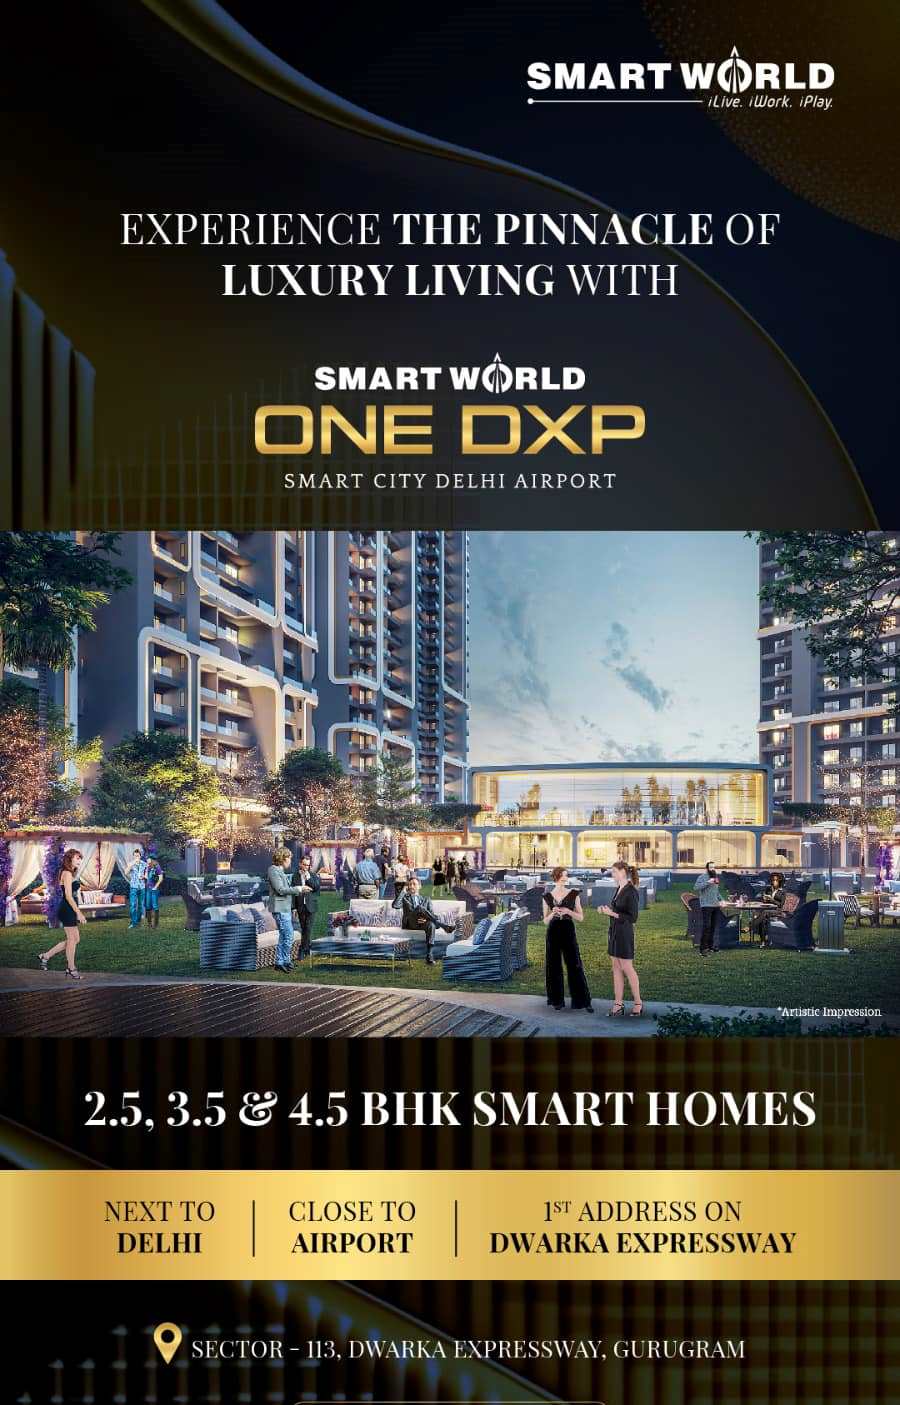 Experience the pinnacle of luxury living at Smart World One DXP in Sector 113, Gurgaon